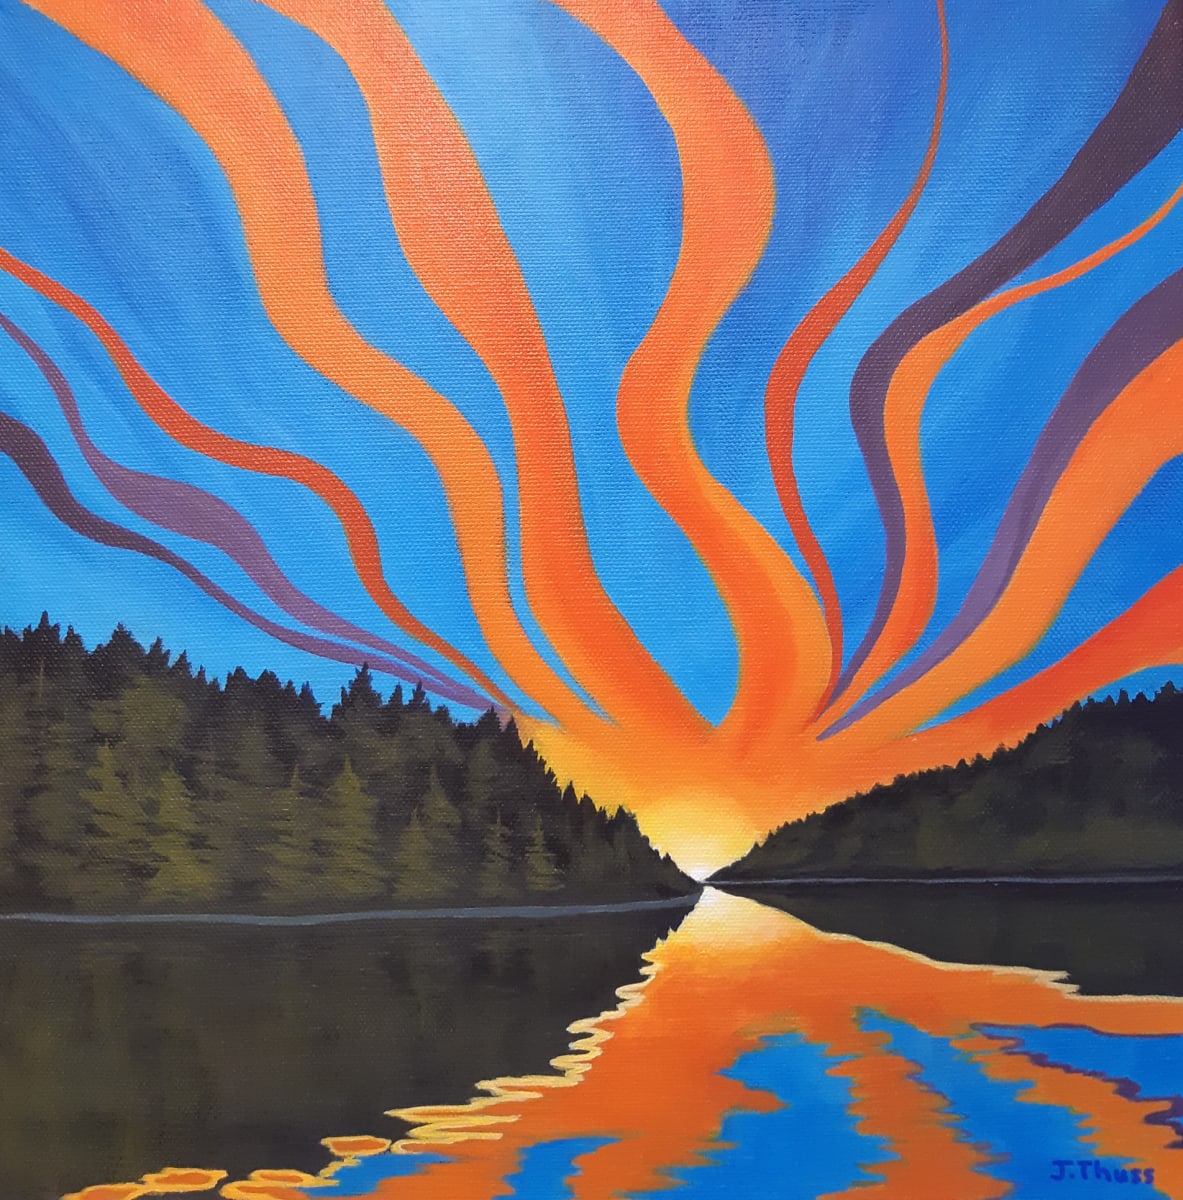 Summer Sunset by Jane Thuss  Image: Orange and purple rays of light stretch upwards into the evening sky as the sun sets over a dark forest and blue and orange reflective lake.